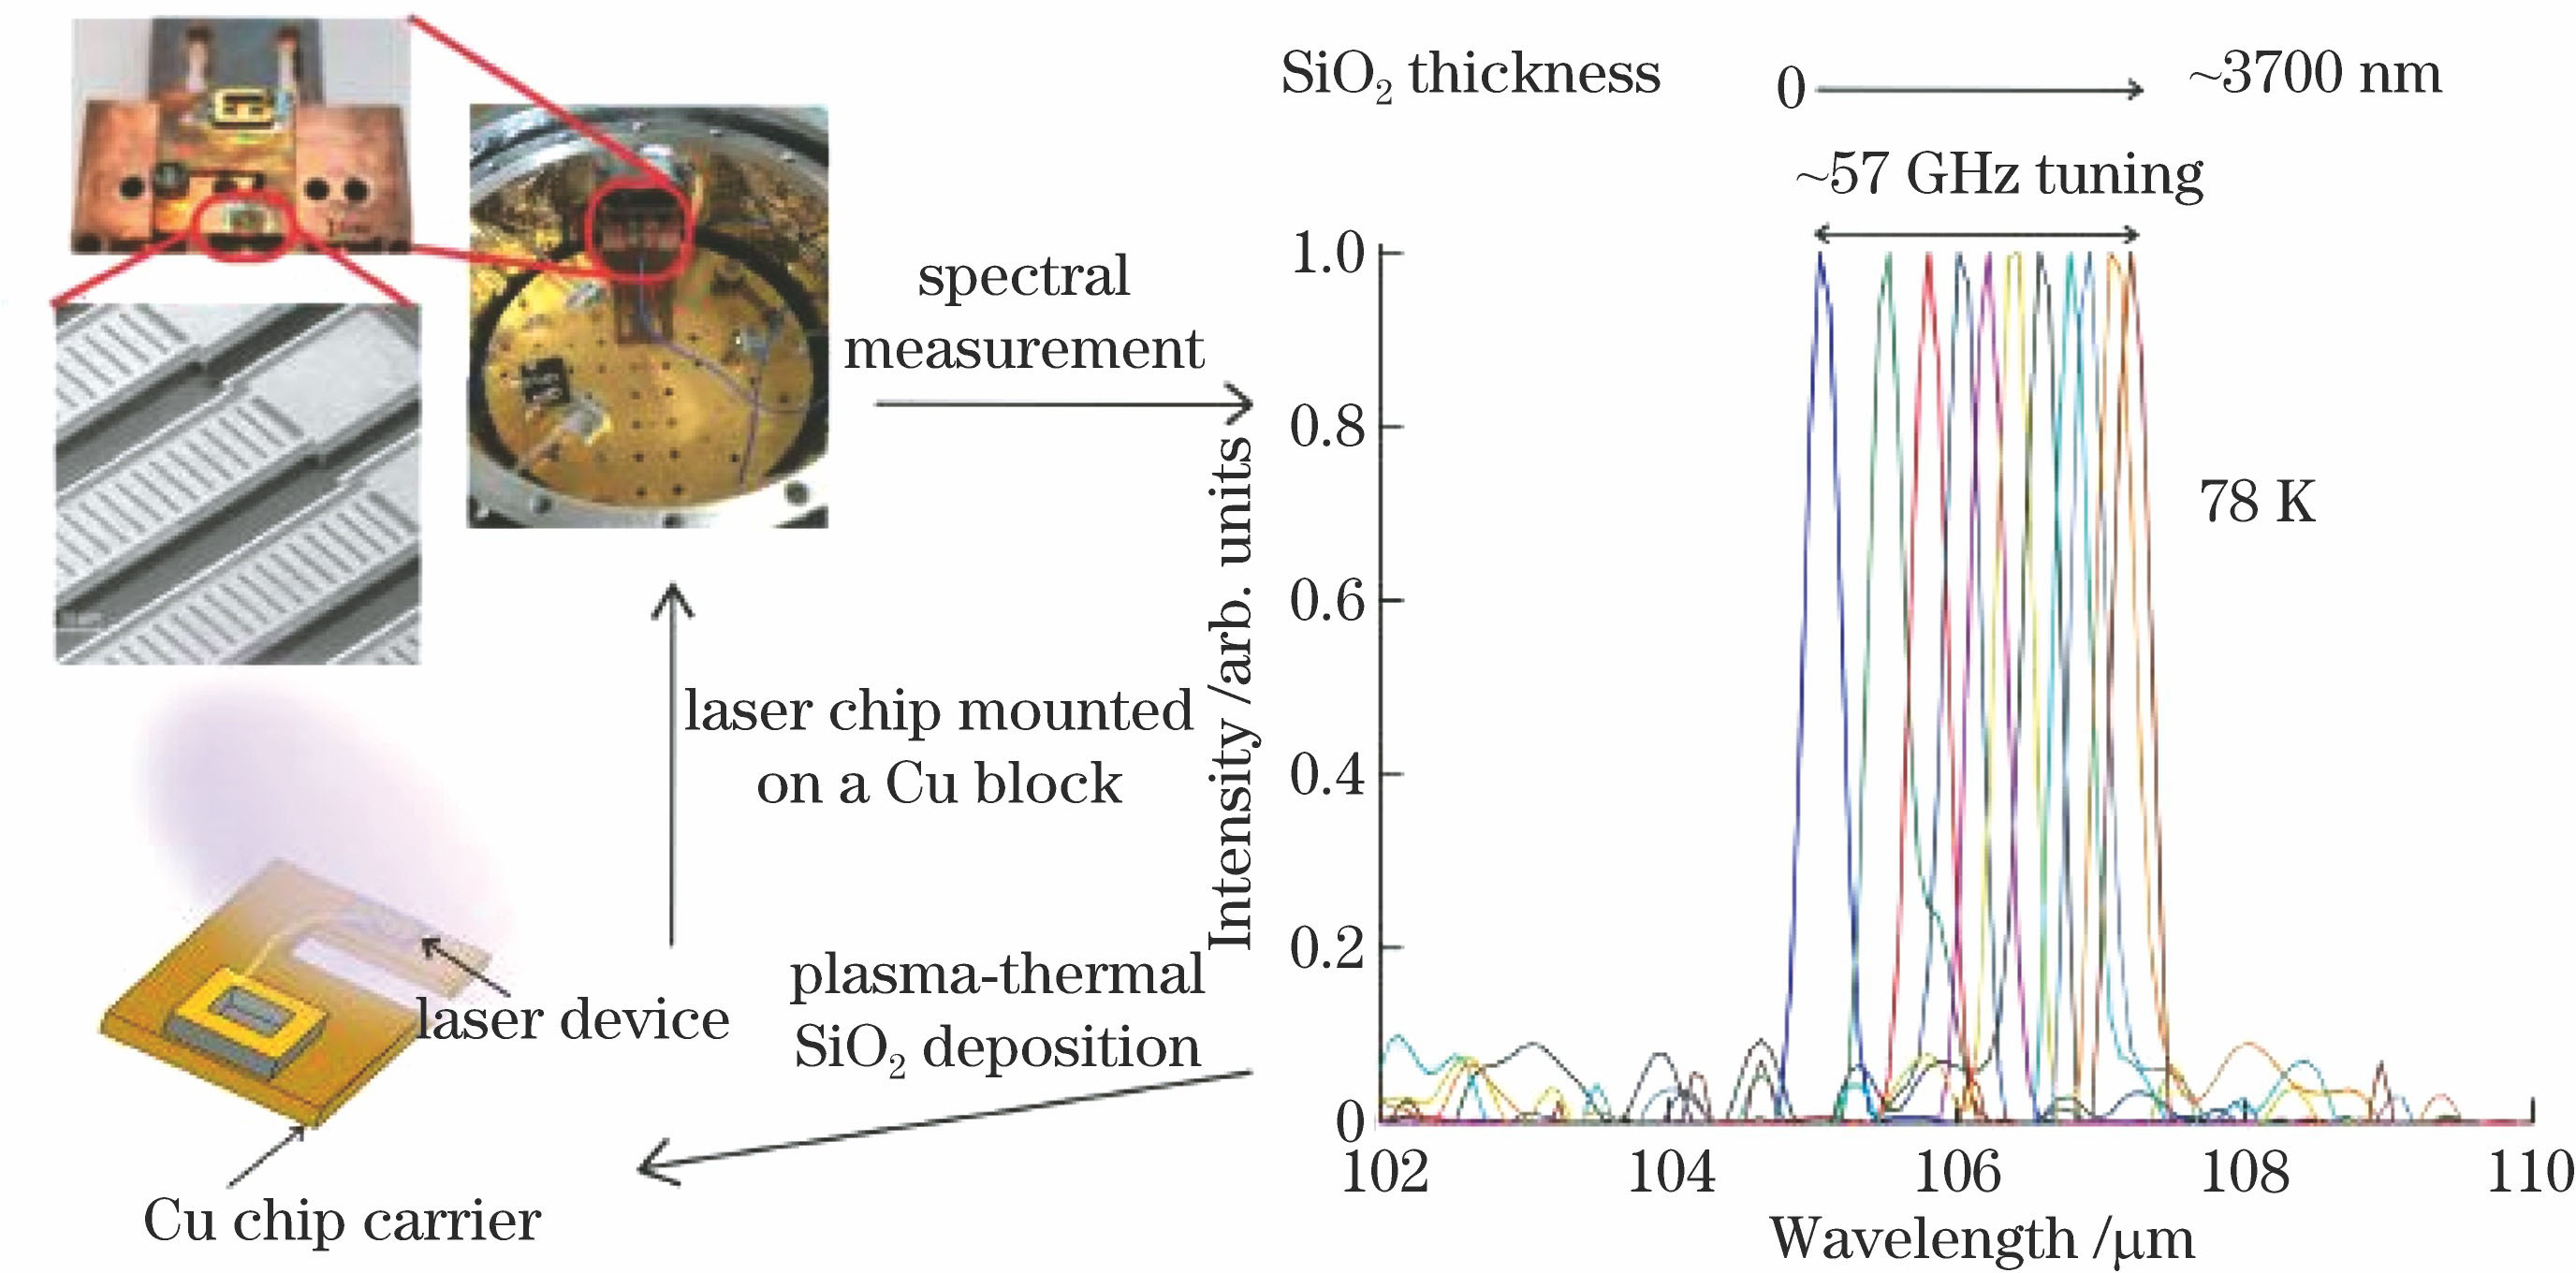 Optical image and scanning electron microscope image of THz QCL, and THz QCL spectrum of pulsed mode at 78 K when silicon-dioxide is deposited on surface of THz QCL[27]